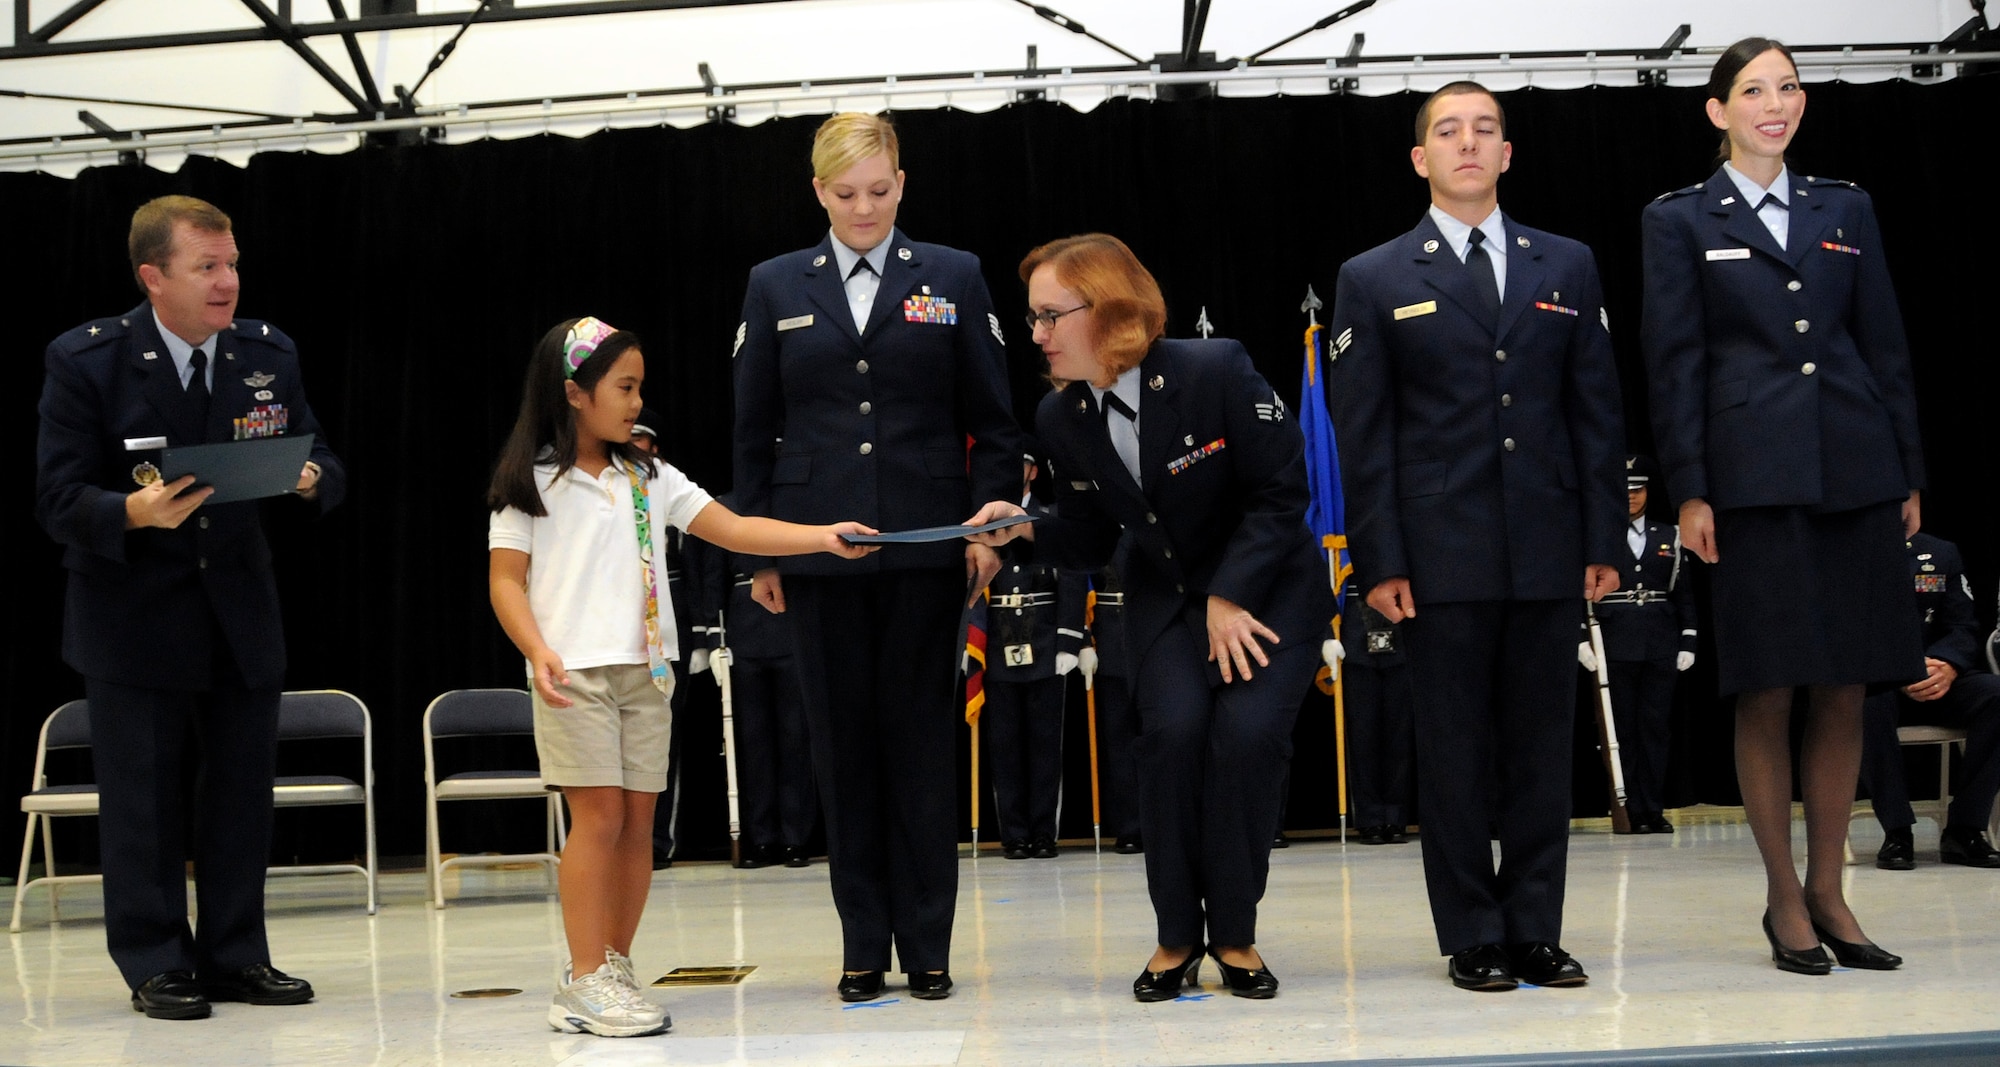 ANDERSEN AIR FORCE BASE, Guam - Jaeleen Jaylo presents first responder Senior Airman Andrea Szerzo with a certificate of appreciation during the Andersen Elementary School Awards Ceremony March 4. The quick responses and actions of these medical professionals were instrumental to Jaeleen Jaylo's positive outcome. (U.S. Air Force photo by Airman 1st Class Courtney Witt)
 